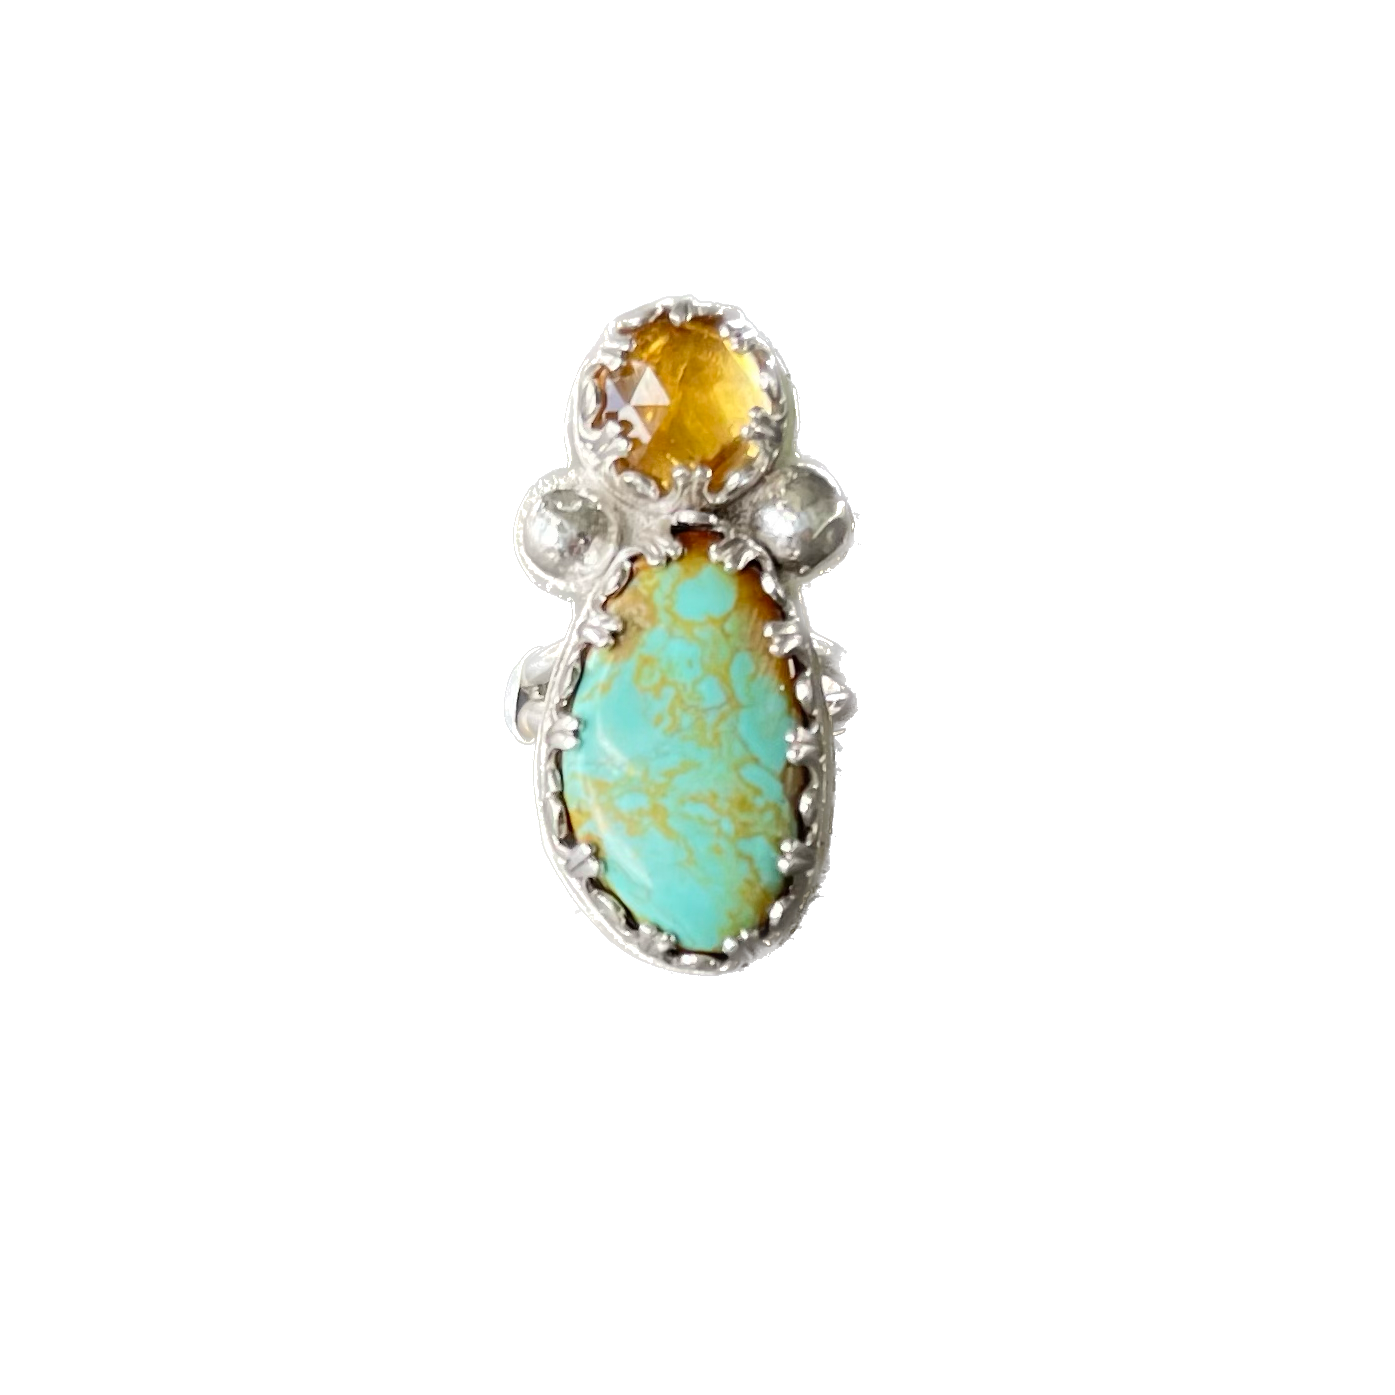 Turquoise and Citrine ring